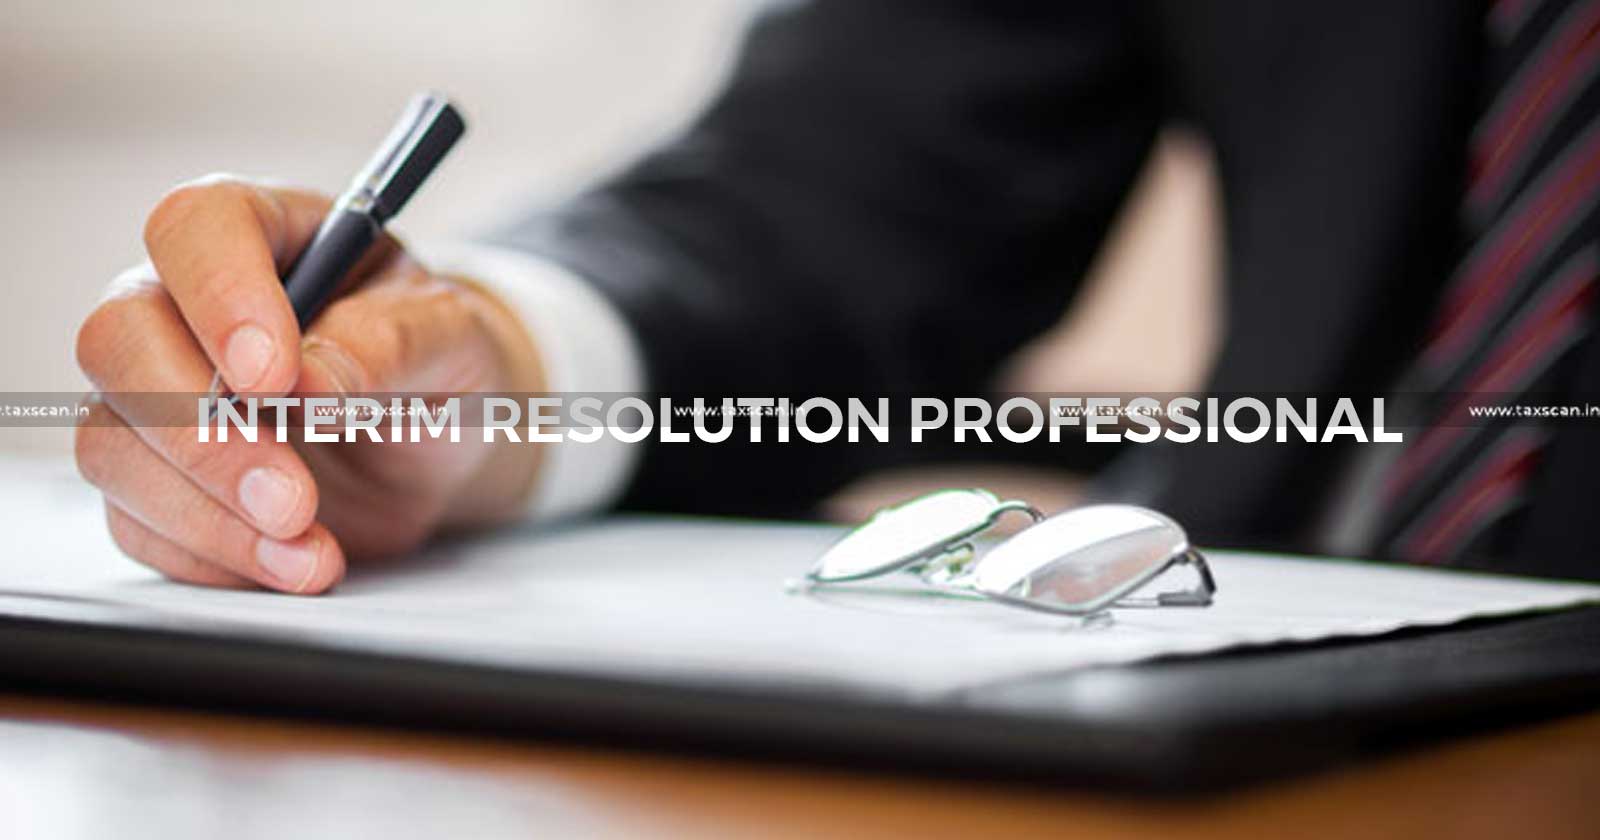 NCLT - Resolution Professional - Appointment of Resolution Professional - National Company Law Tribunal - taxscan